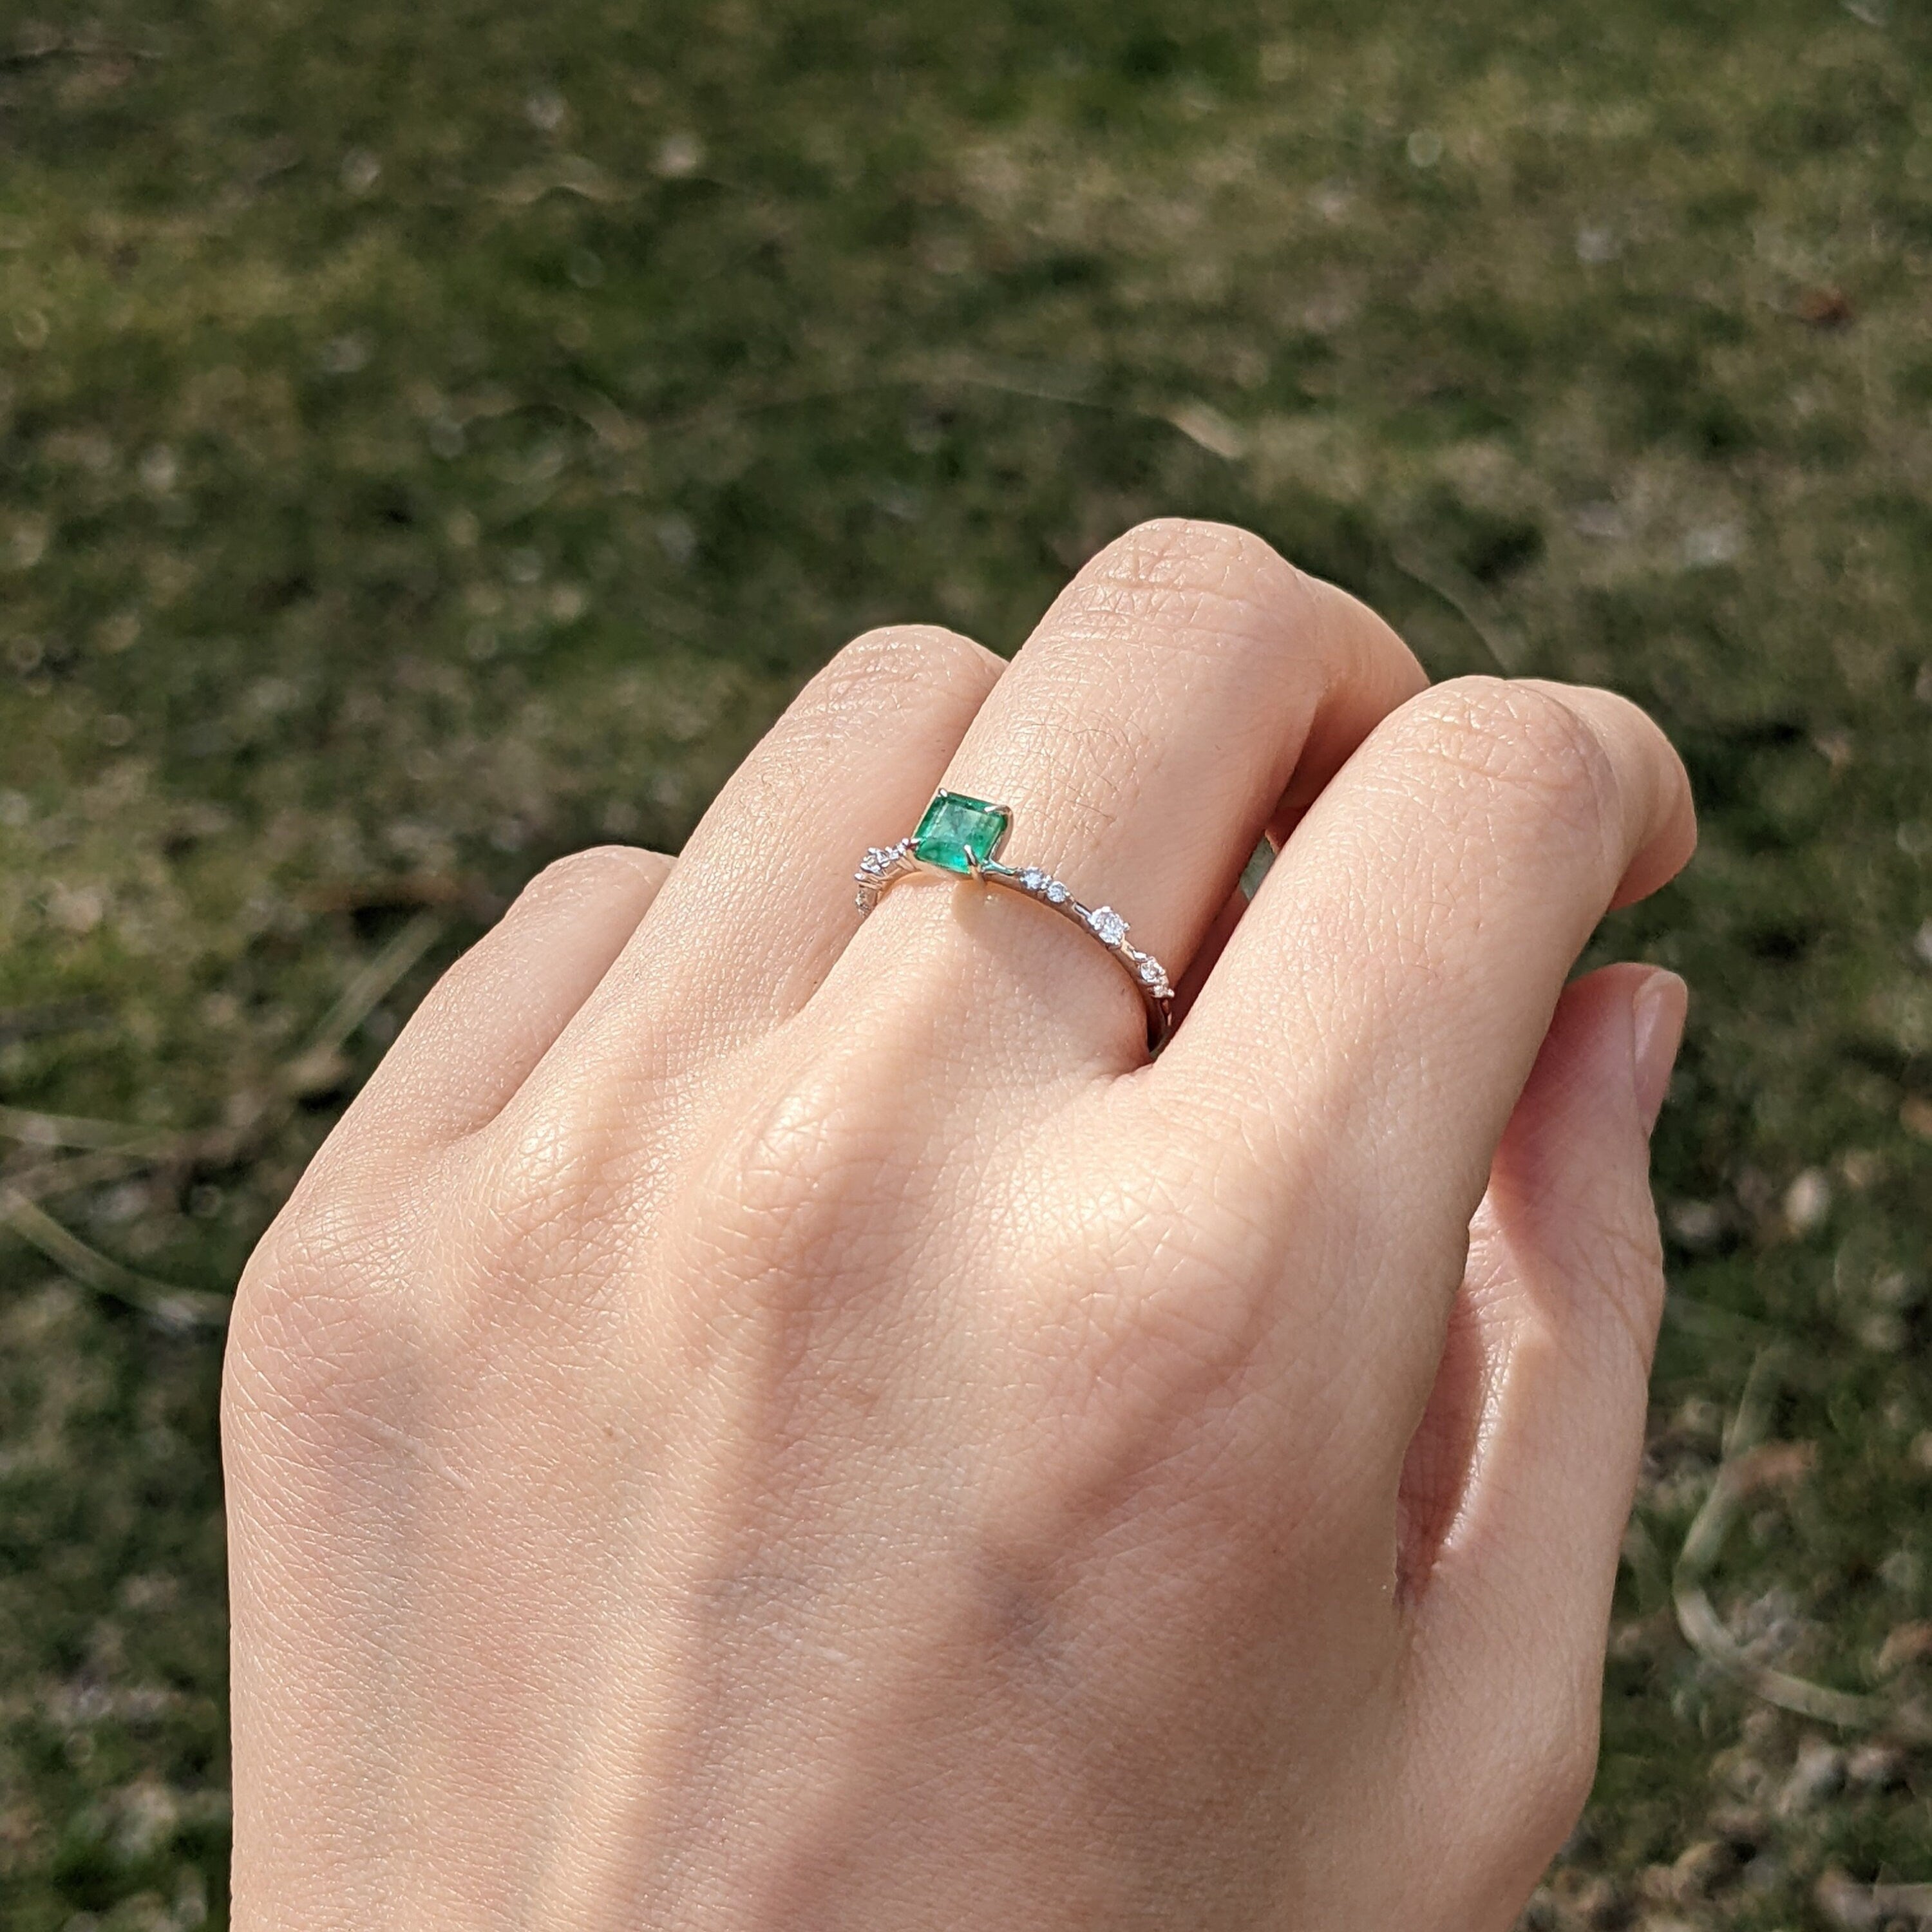 Fancy Green Emerald Ring in 14k Gold with Natural Diamond Accents | May Birthstone | Unique Shank Design | Dainty Ring